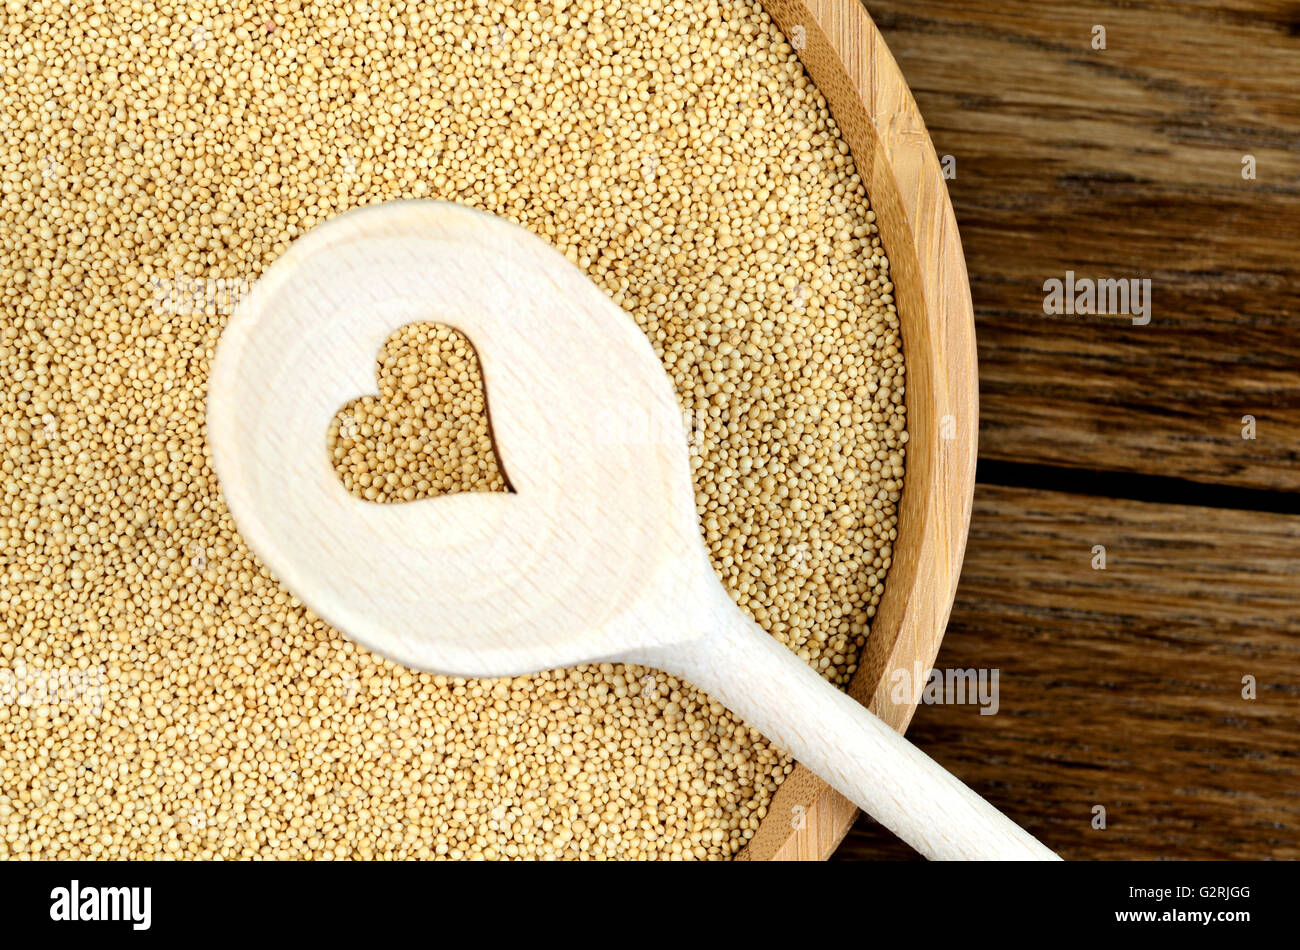 Amaranth seeds in a bamboo and wooden spoon with heart shape on table Stock Photo